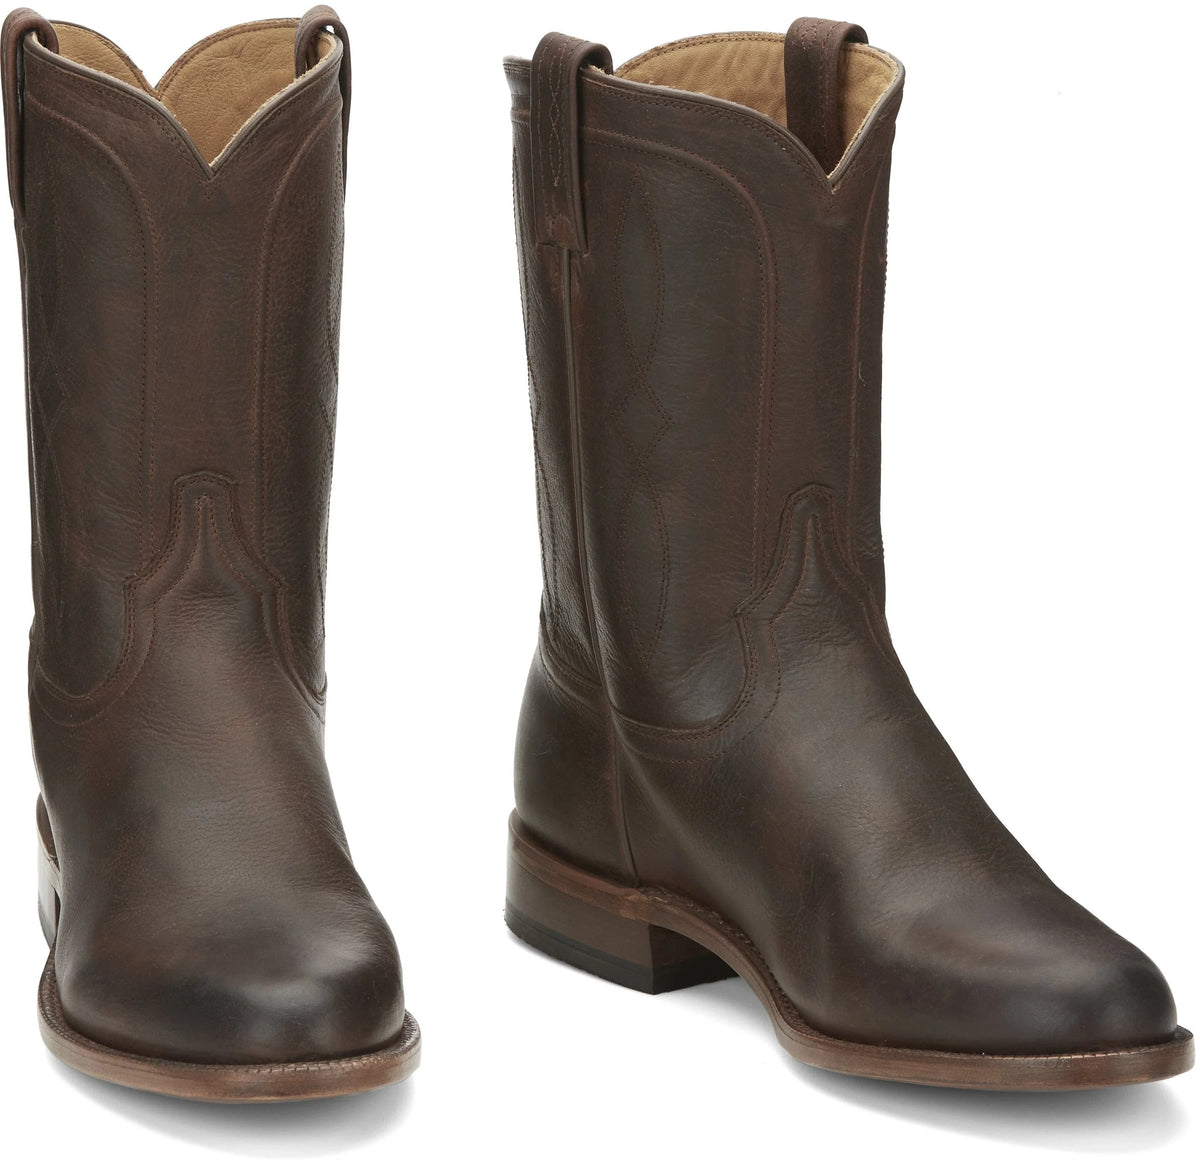 Tony Lama Monterey 10" Round Toe Boots in Whiskey Brown